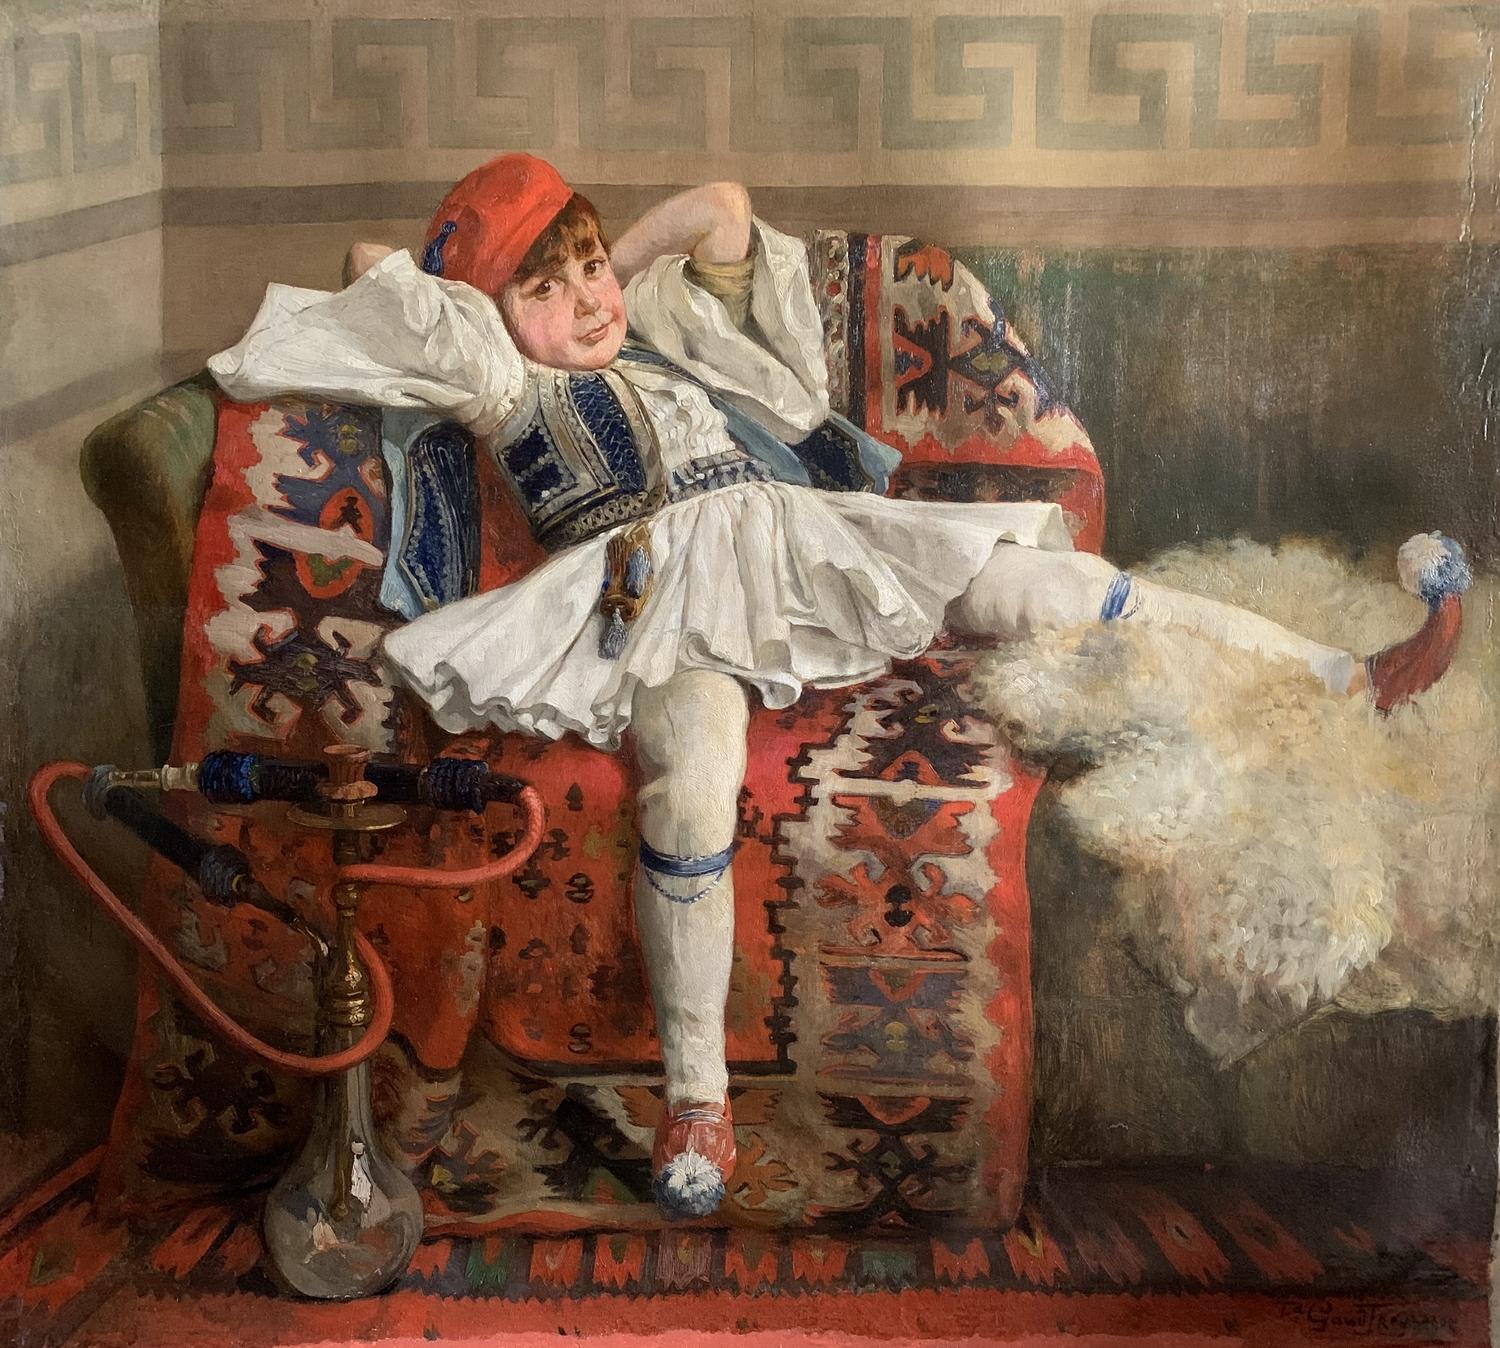 Painted Boy Dressed as an Evzone - Fernand Gaudfroy, 1908